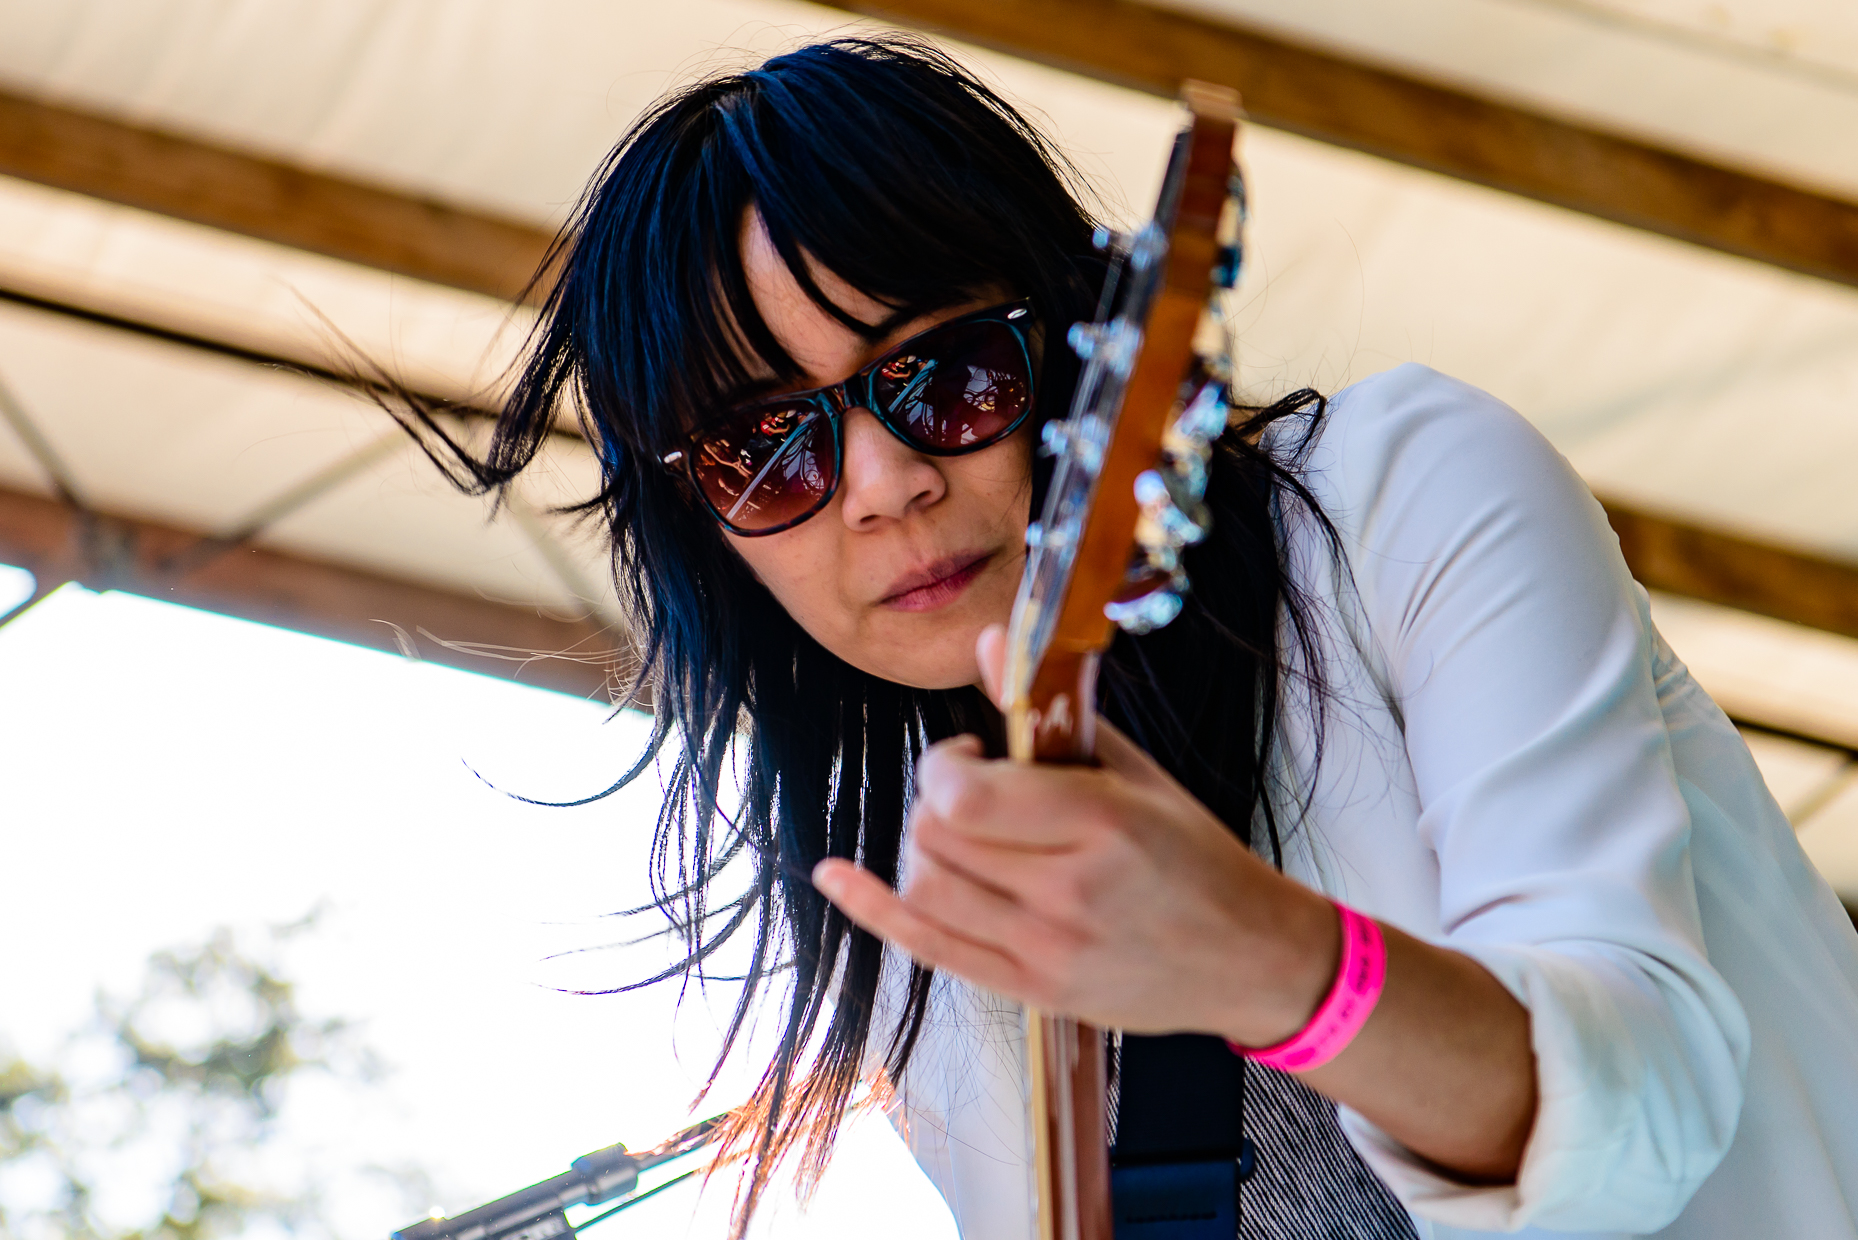 Austin Event Photographer - SXSJ - Thao & The Get Down Stay Down